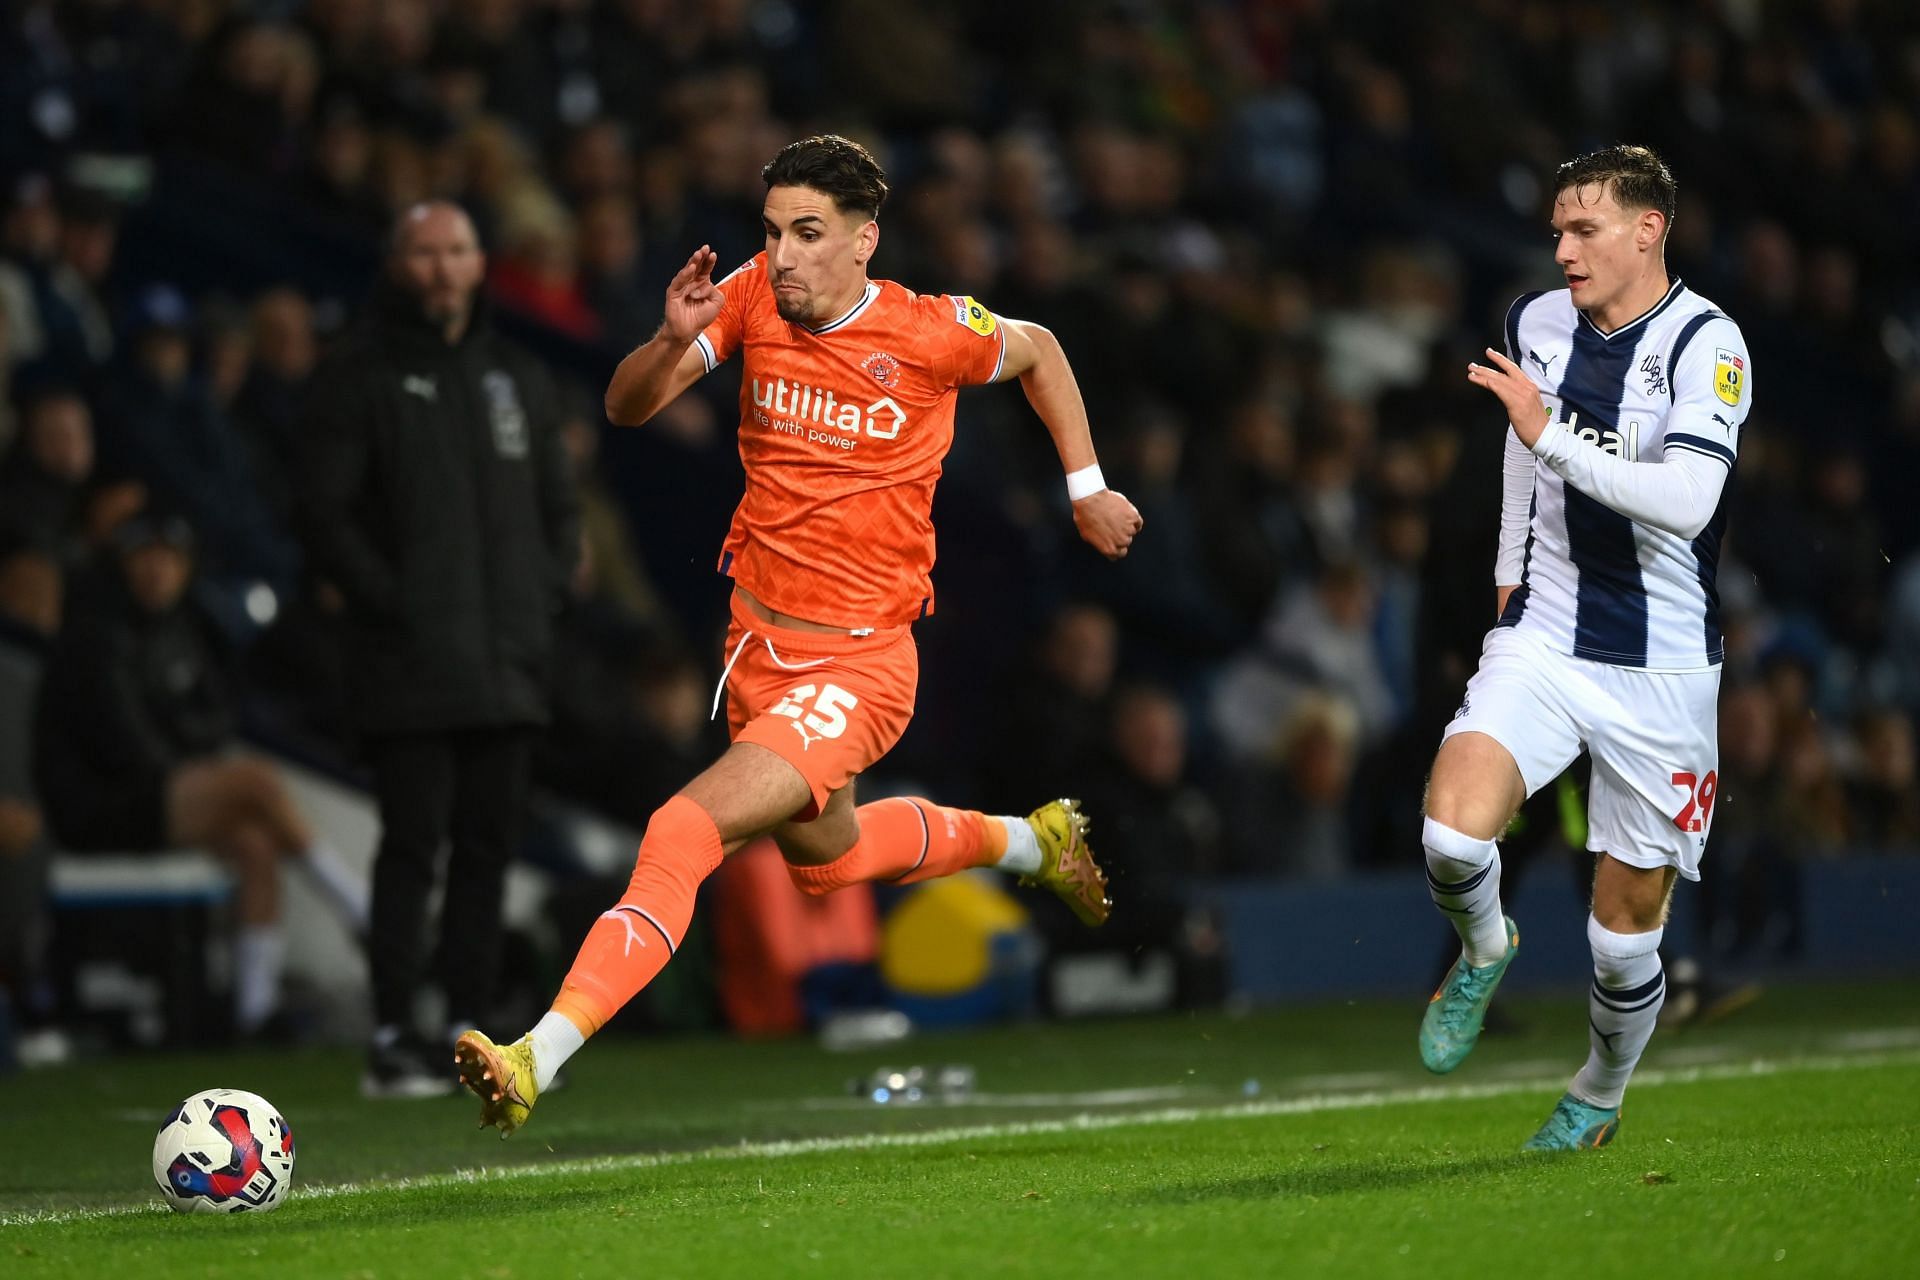 West Bromwich Albion v Blackpool - Sky Bet Championship